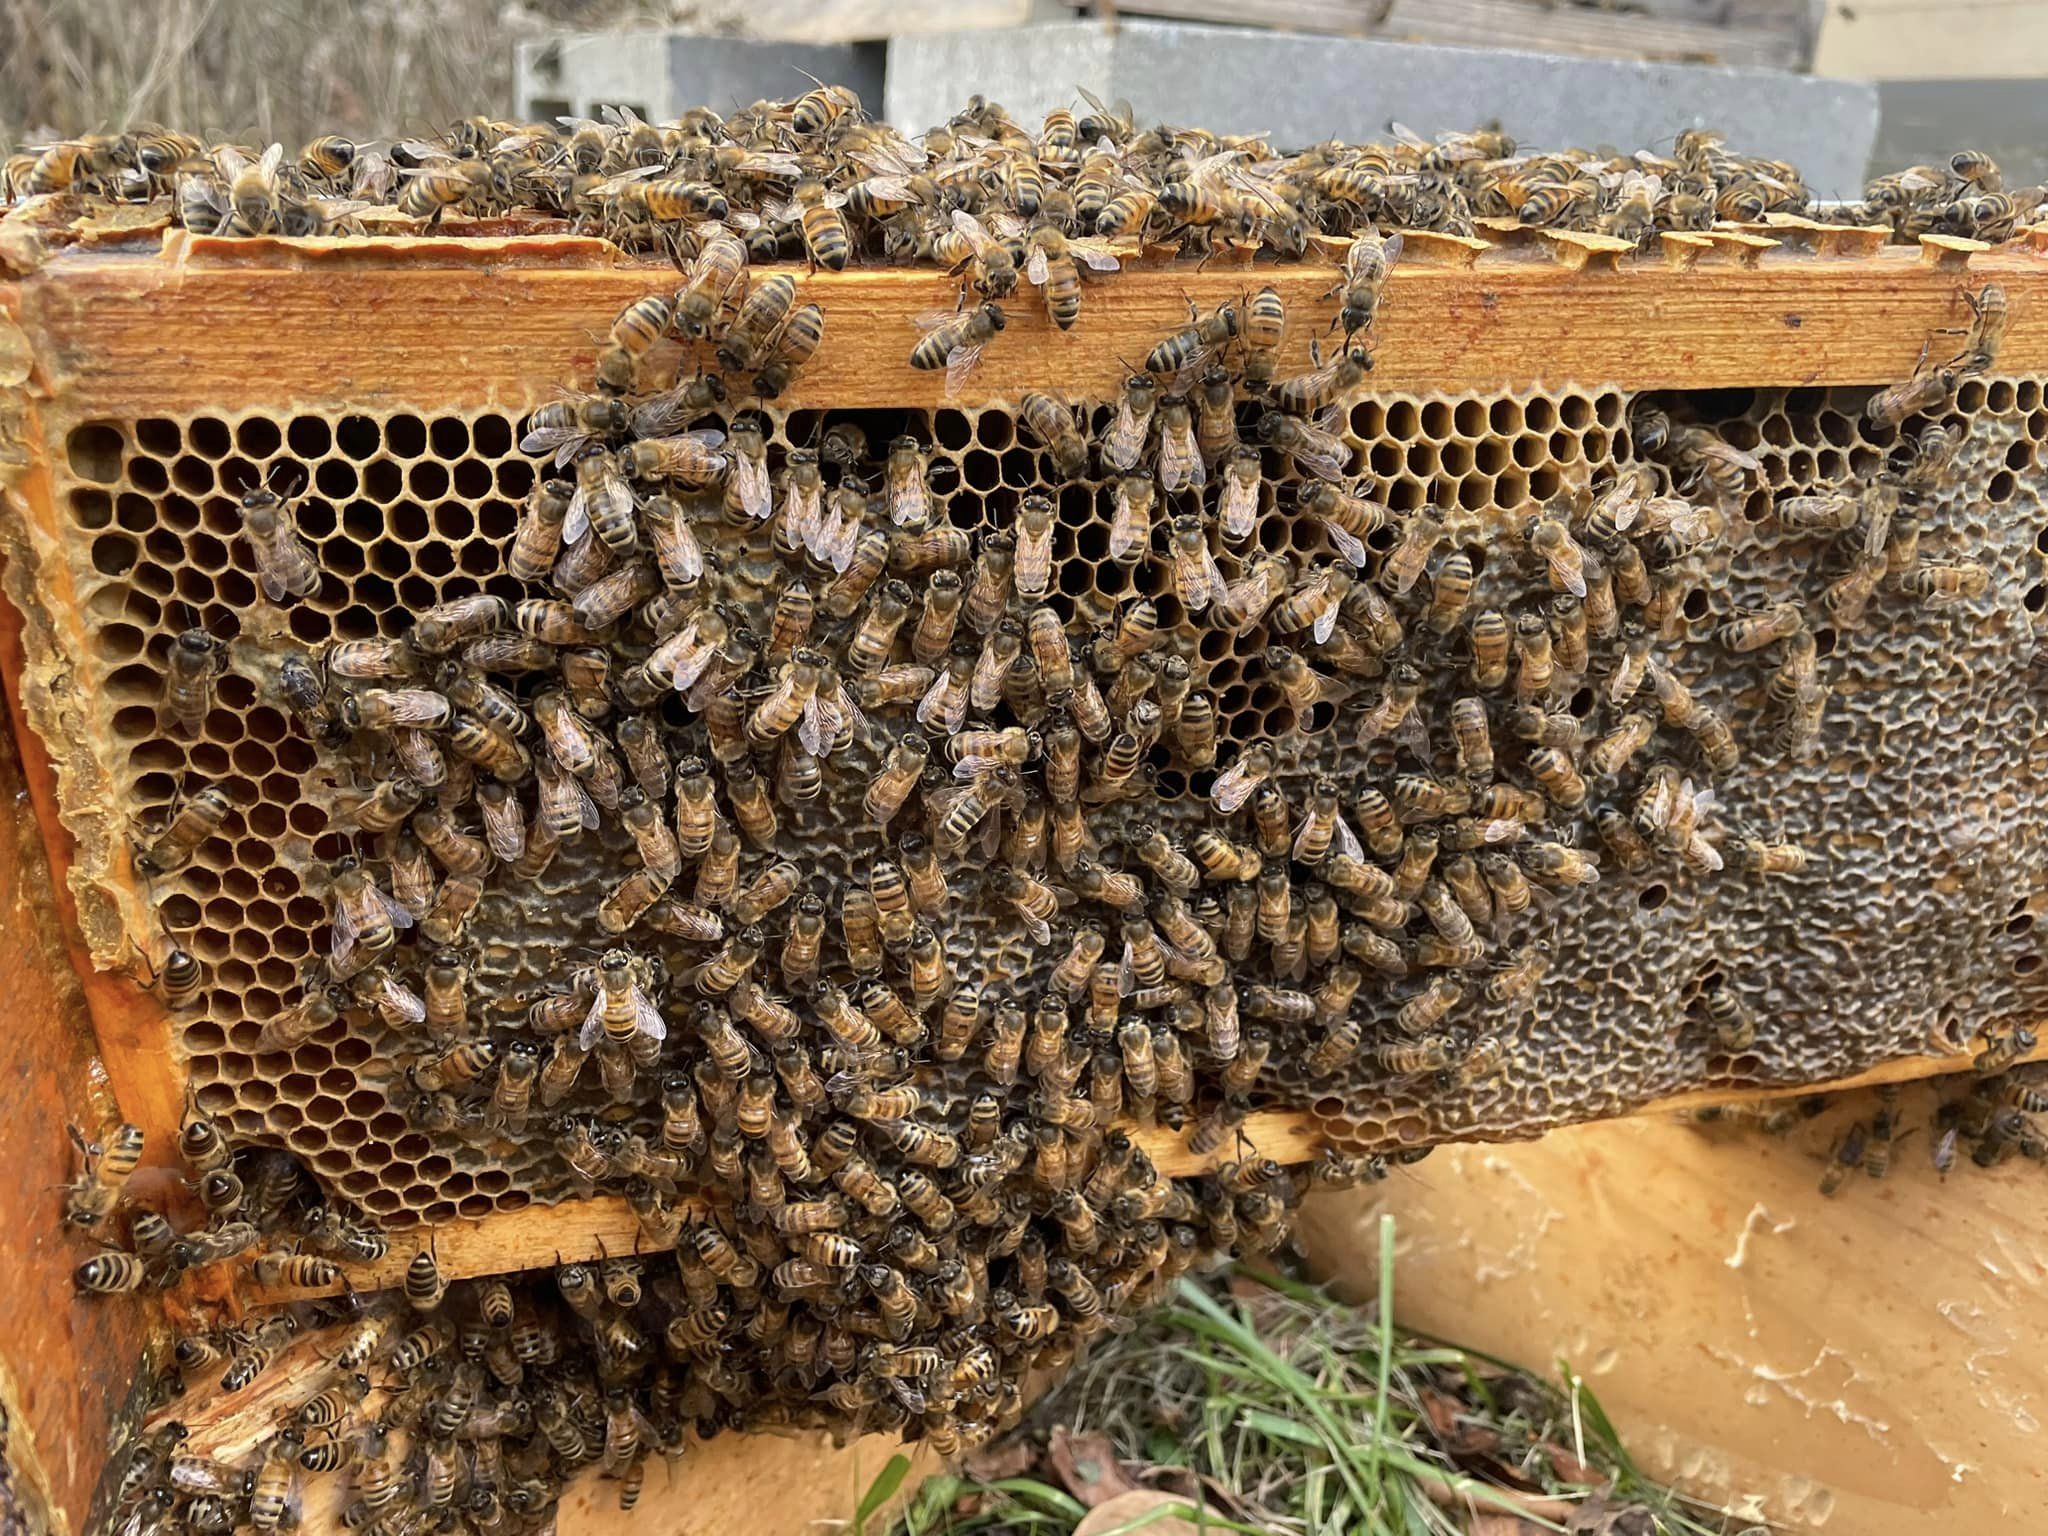 Swarm of honey bees on honey comb board surrounded by wooden frame.